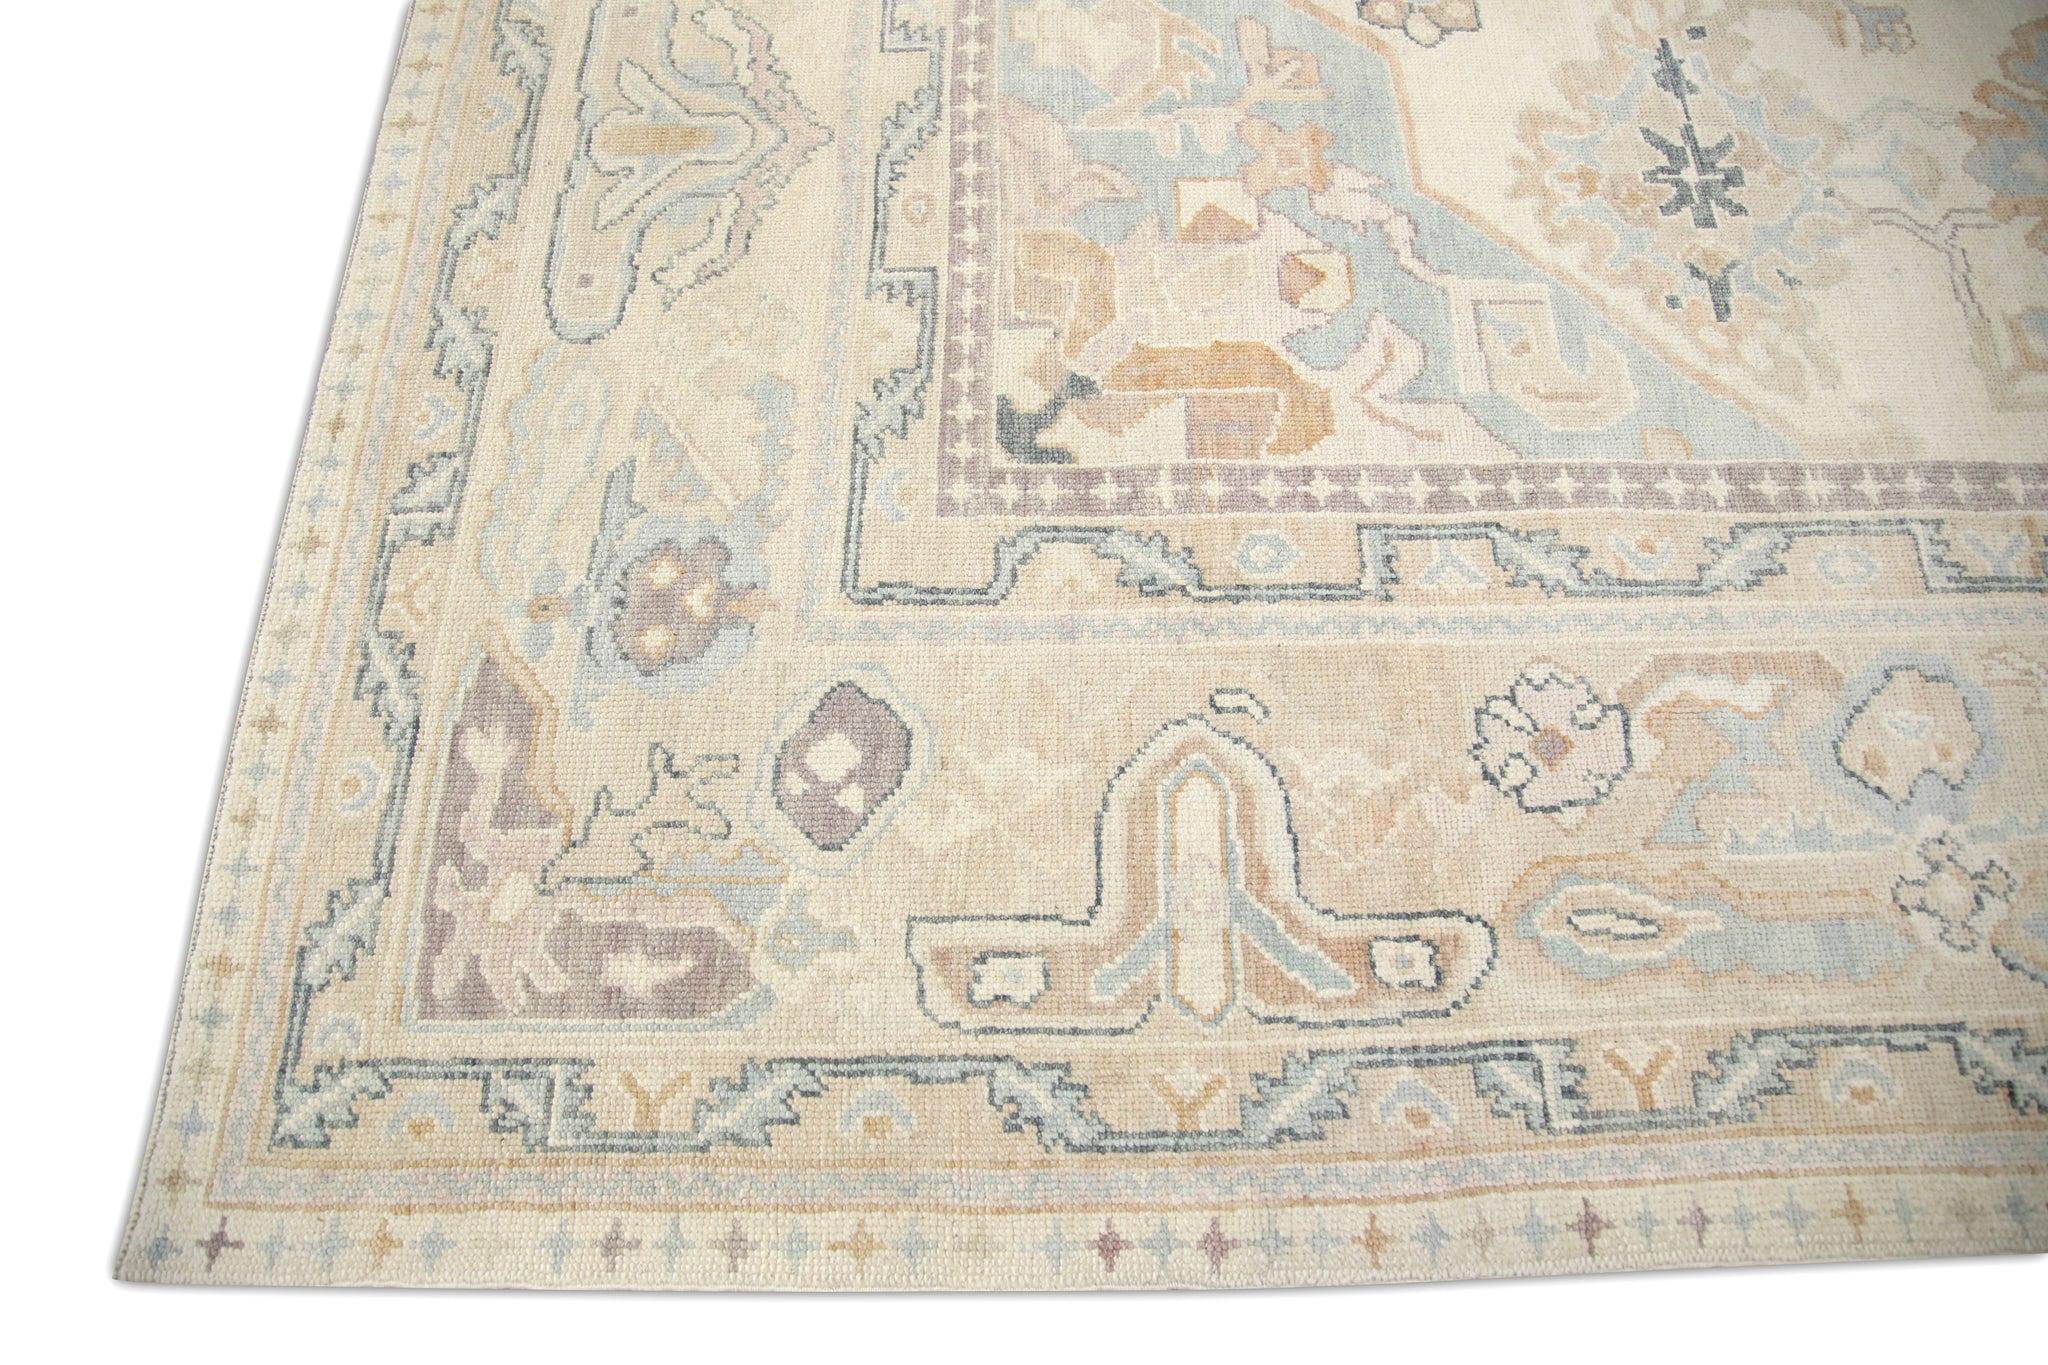 Vegetable Dyed Tan Multicolor Floral Handwoven Wool Oversized Turkish Oushak Rug 11' x 15'3